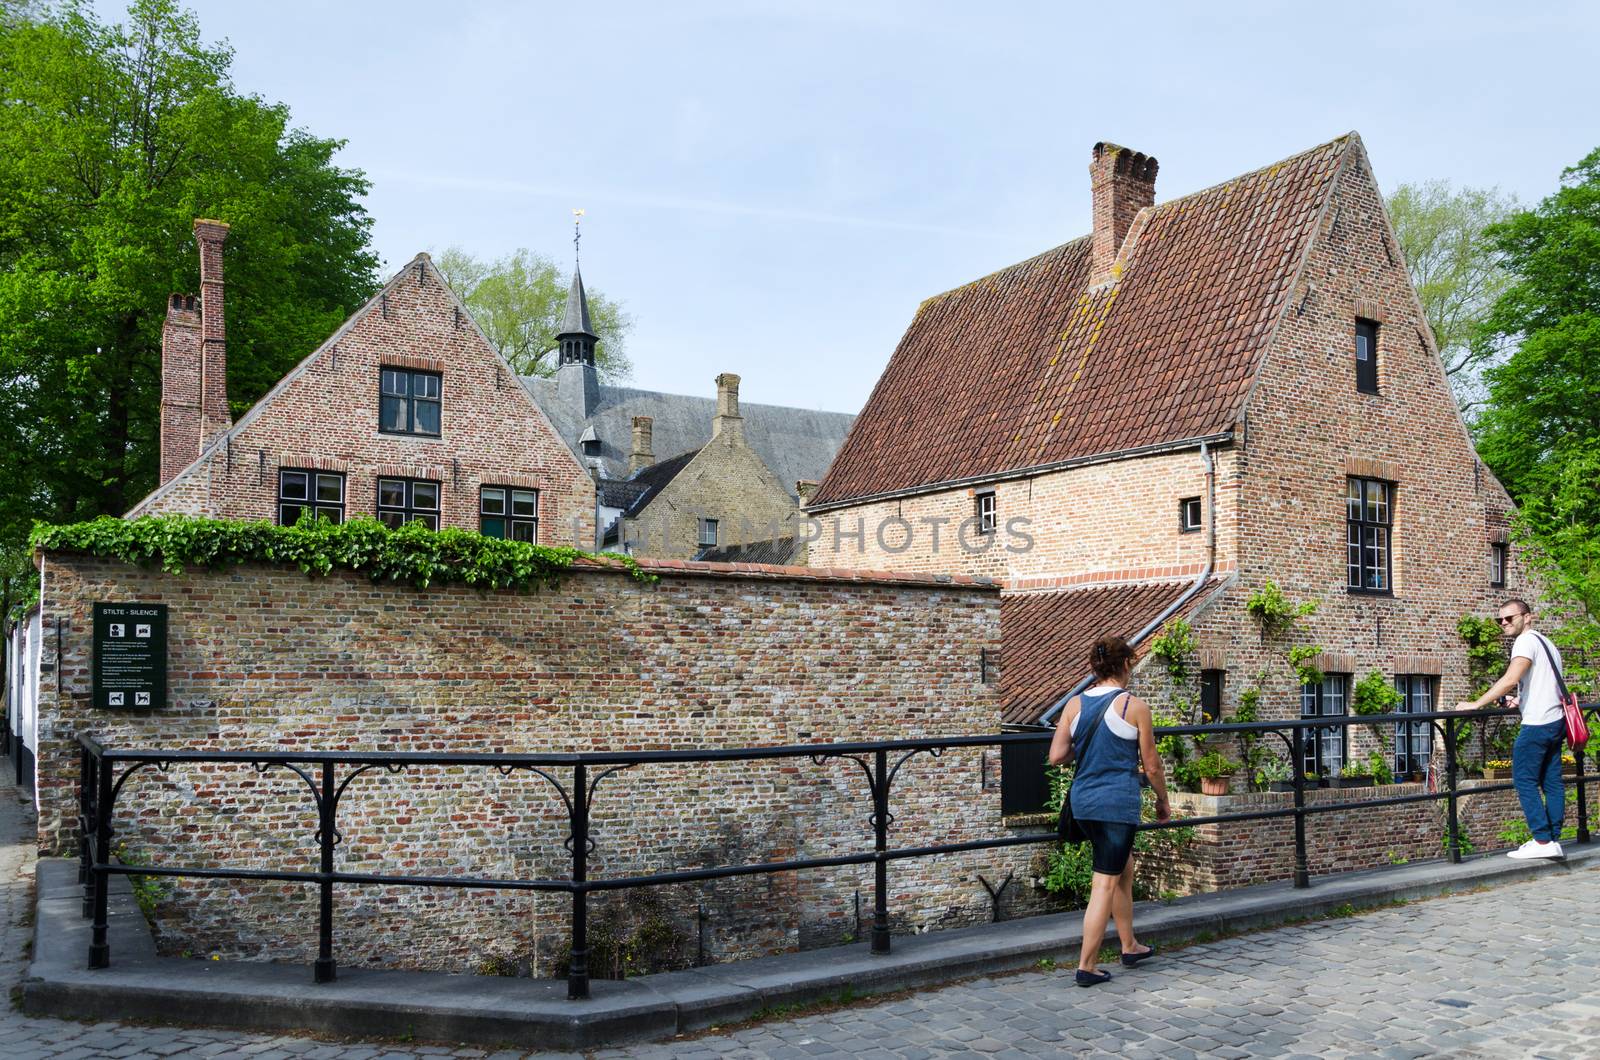 Bruges, Belgium - May 11, 2015: People around the Beguinage (Begijnhof) in Bruges, Belgium. by siraanamwong